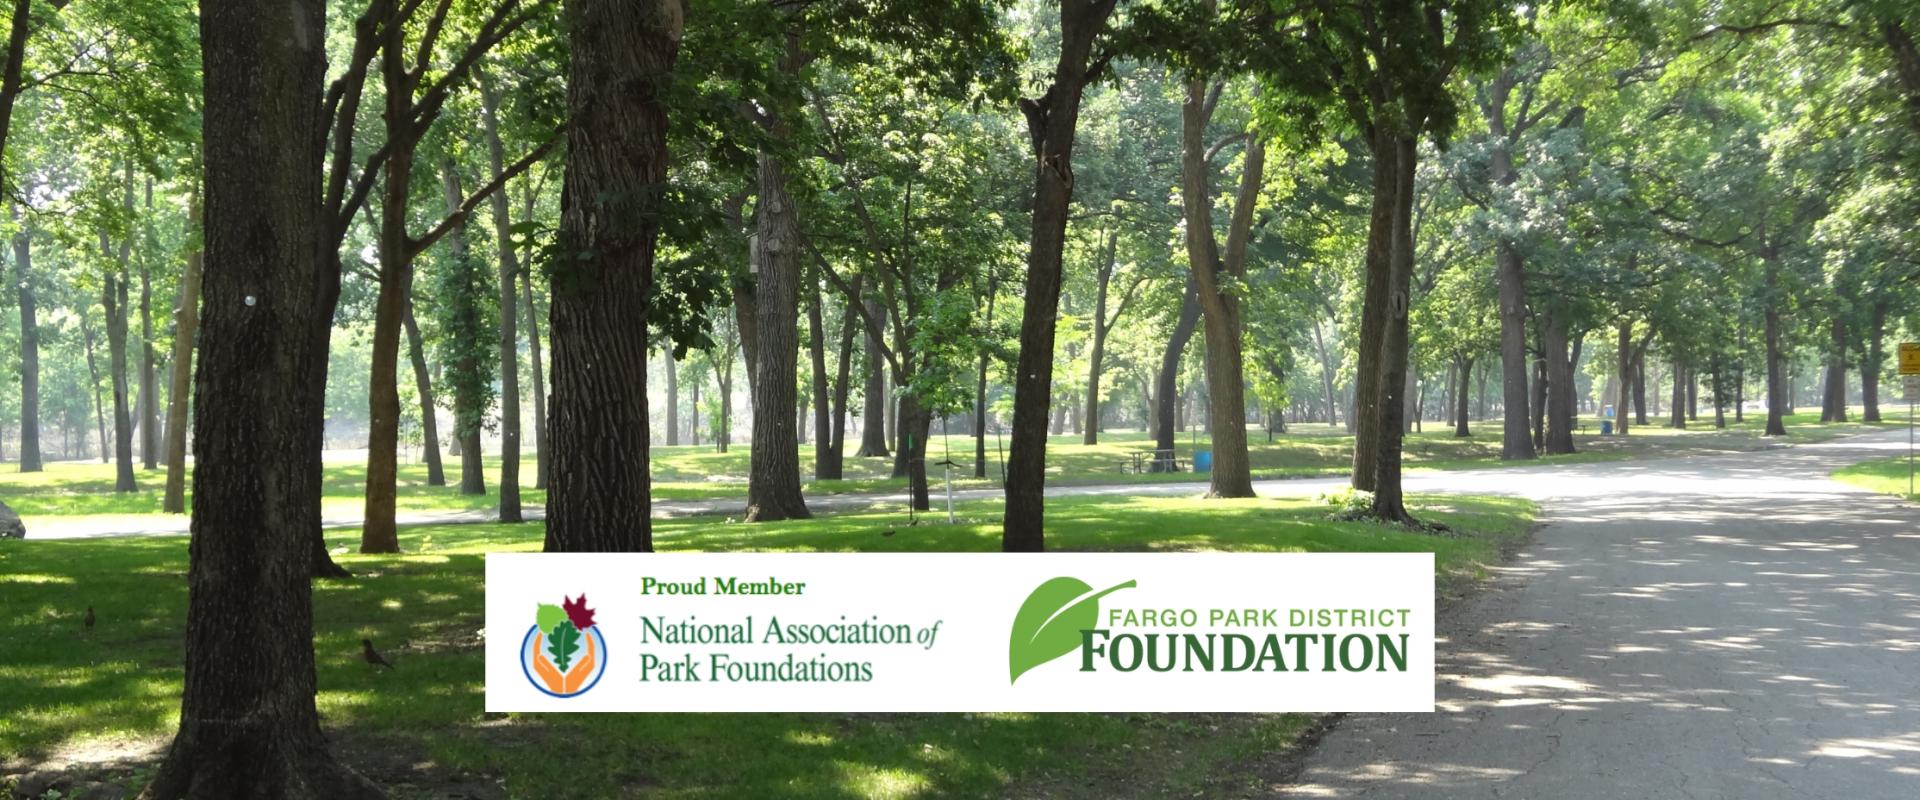 This photo shows a park with trees with the Fargo Park District Foundation logo and the National Parks Foundation Logo